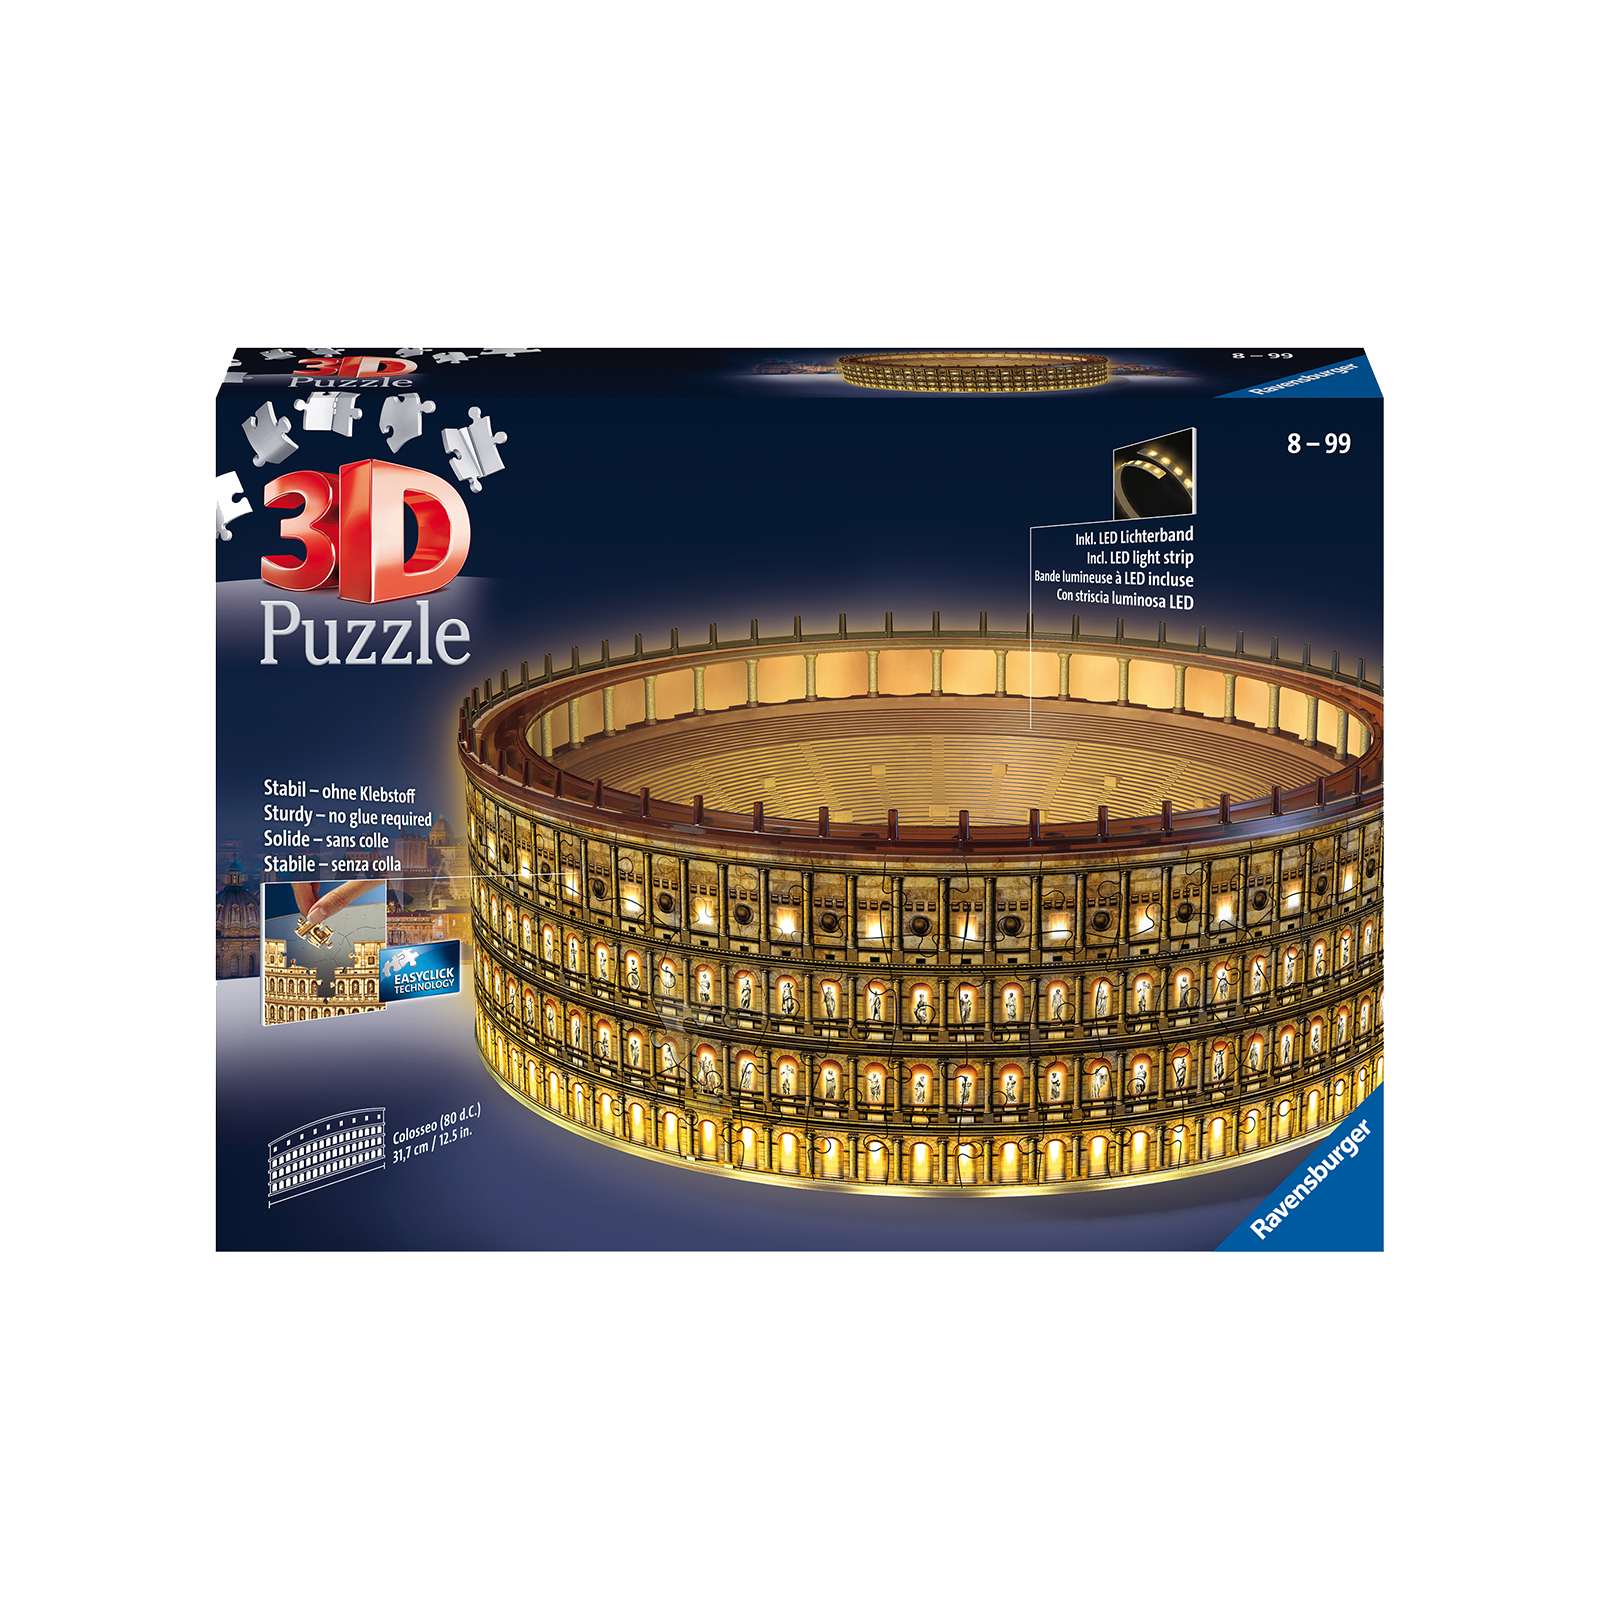 Ravensburger - 3d puzzle colosseo night edition, roma, 216 pezzi, 10+ anni - RAVENSBURGER 3D PUZZLE